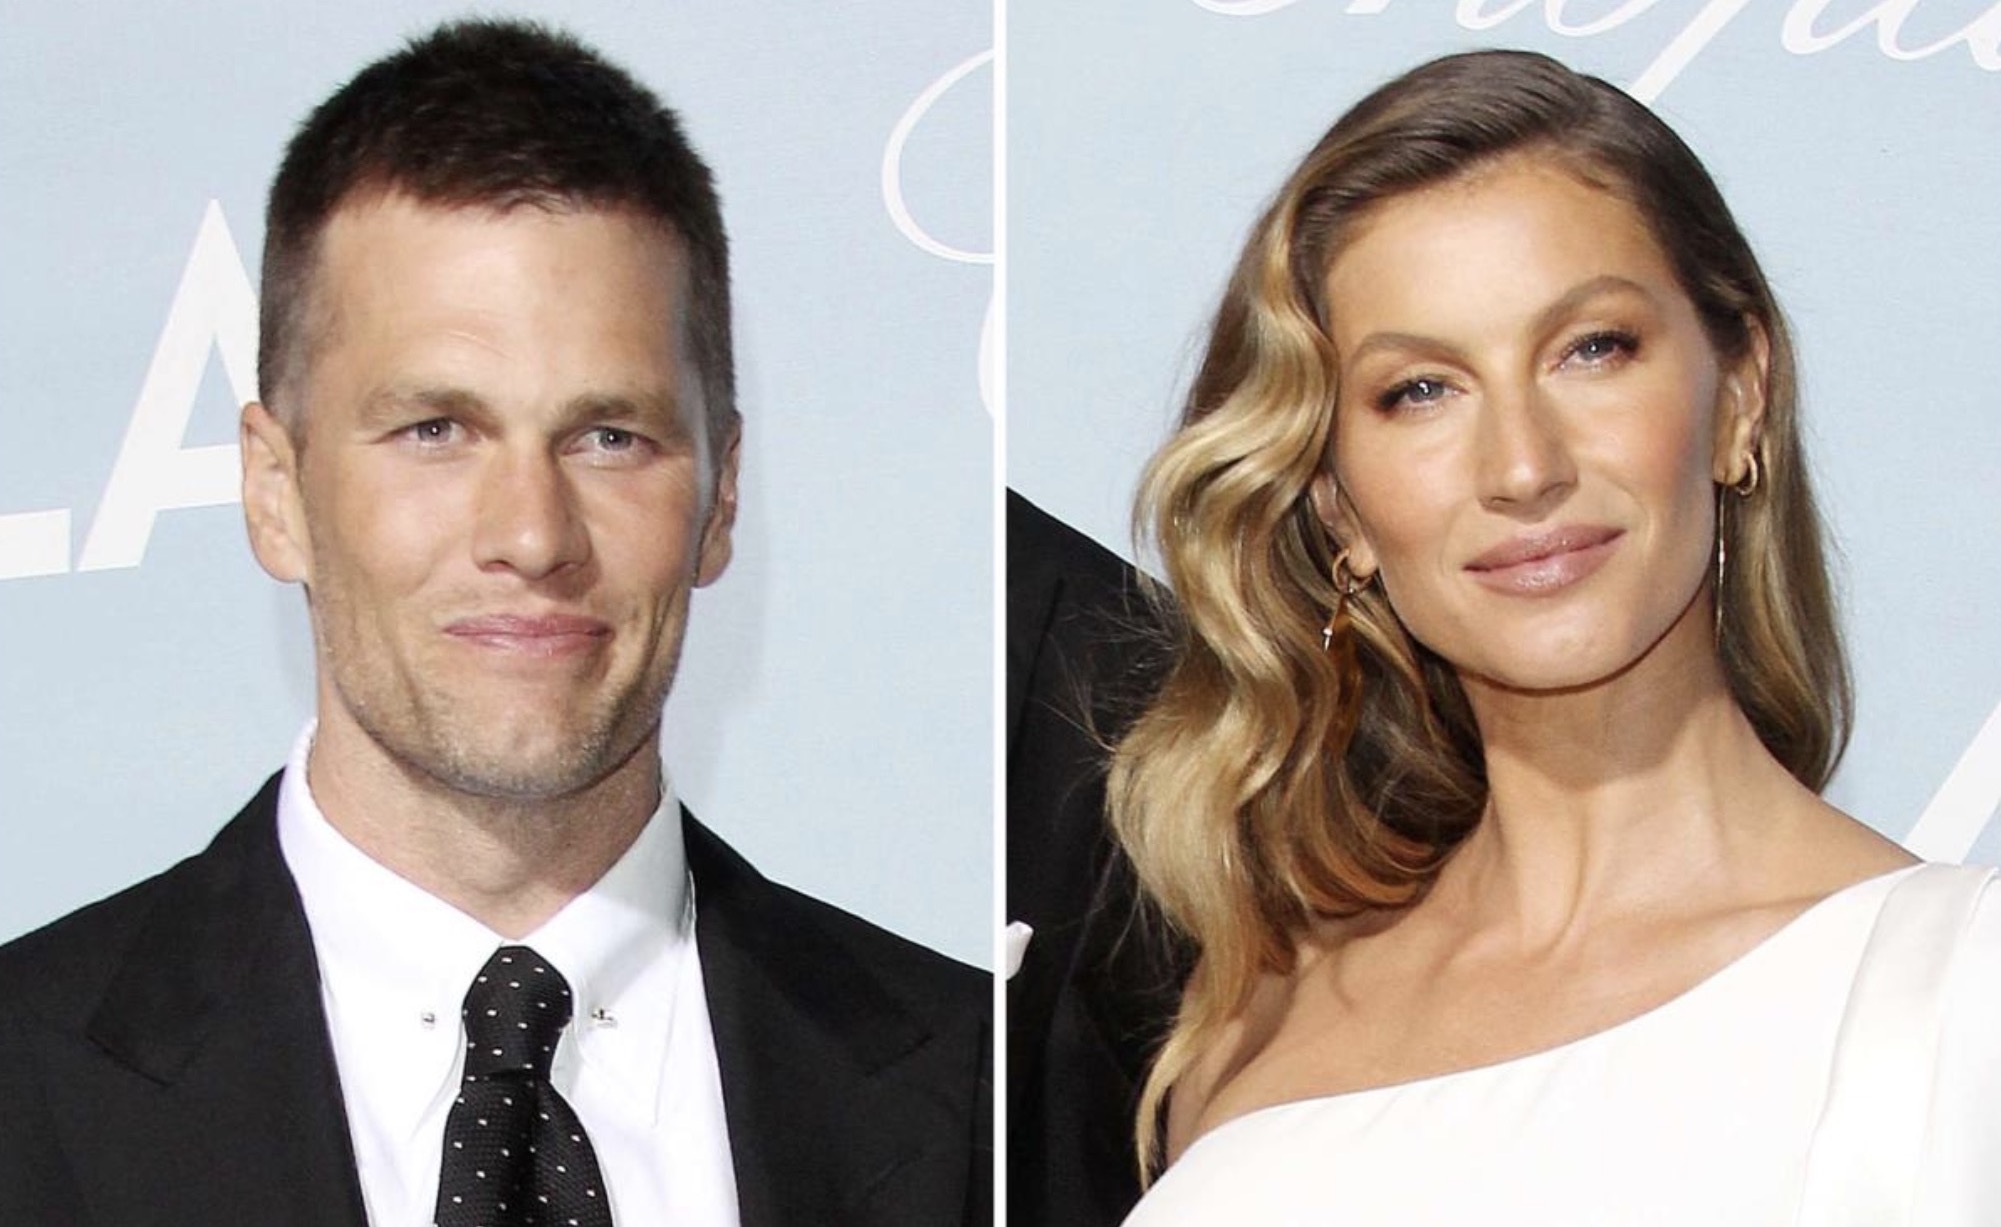 Tom Brady Shares Cryptic Quote After Gisele Bundchens Candid Interview About Their Split 0930